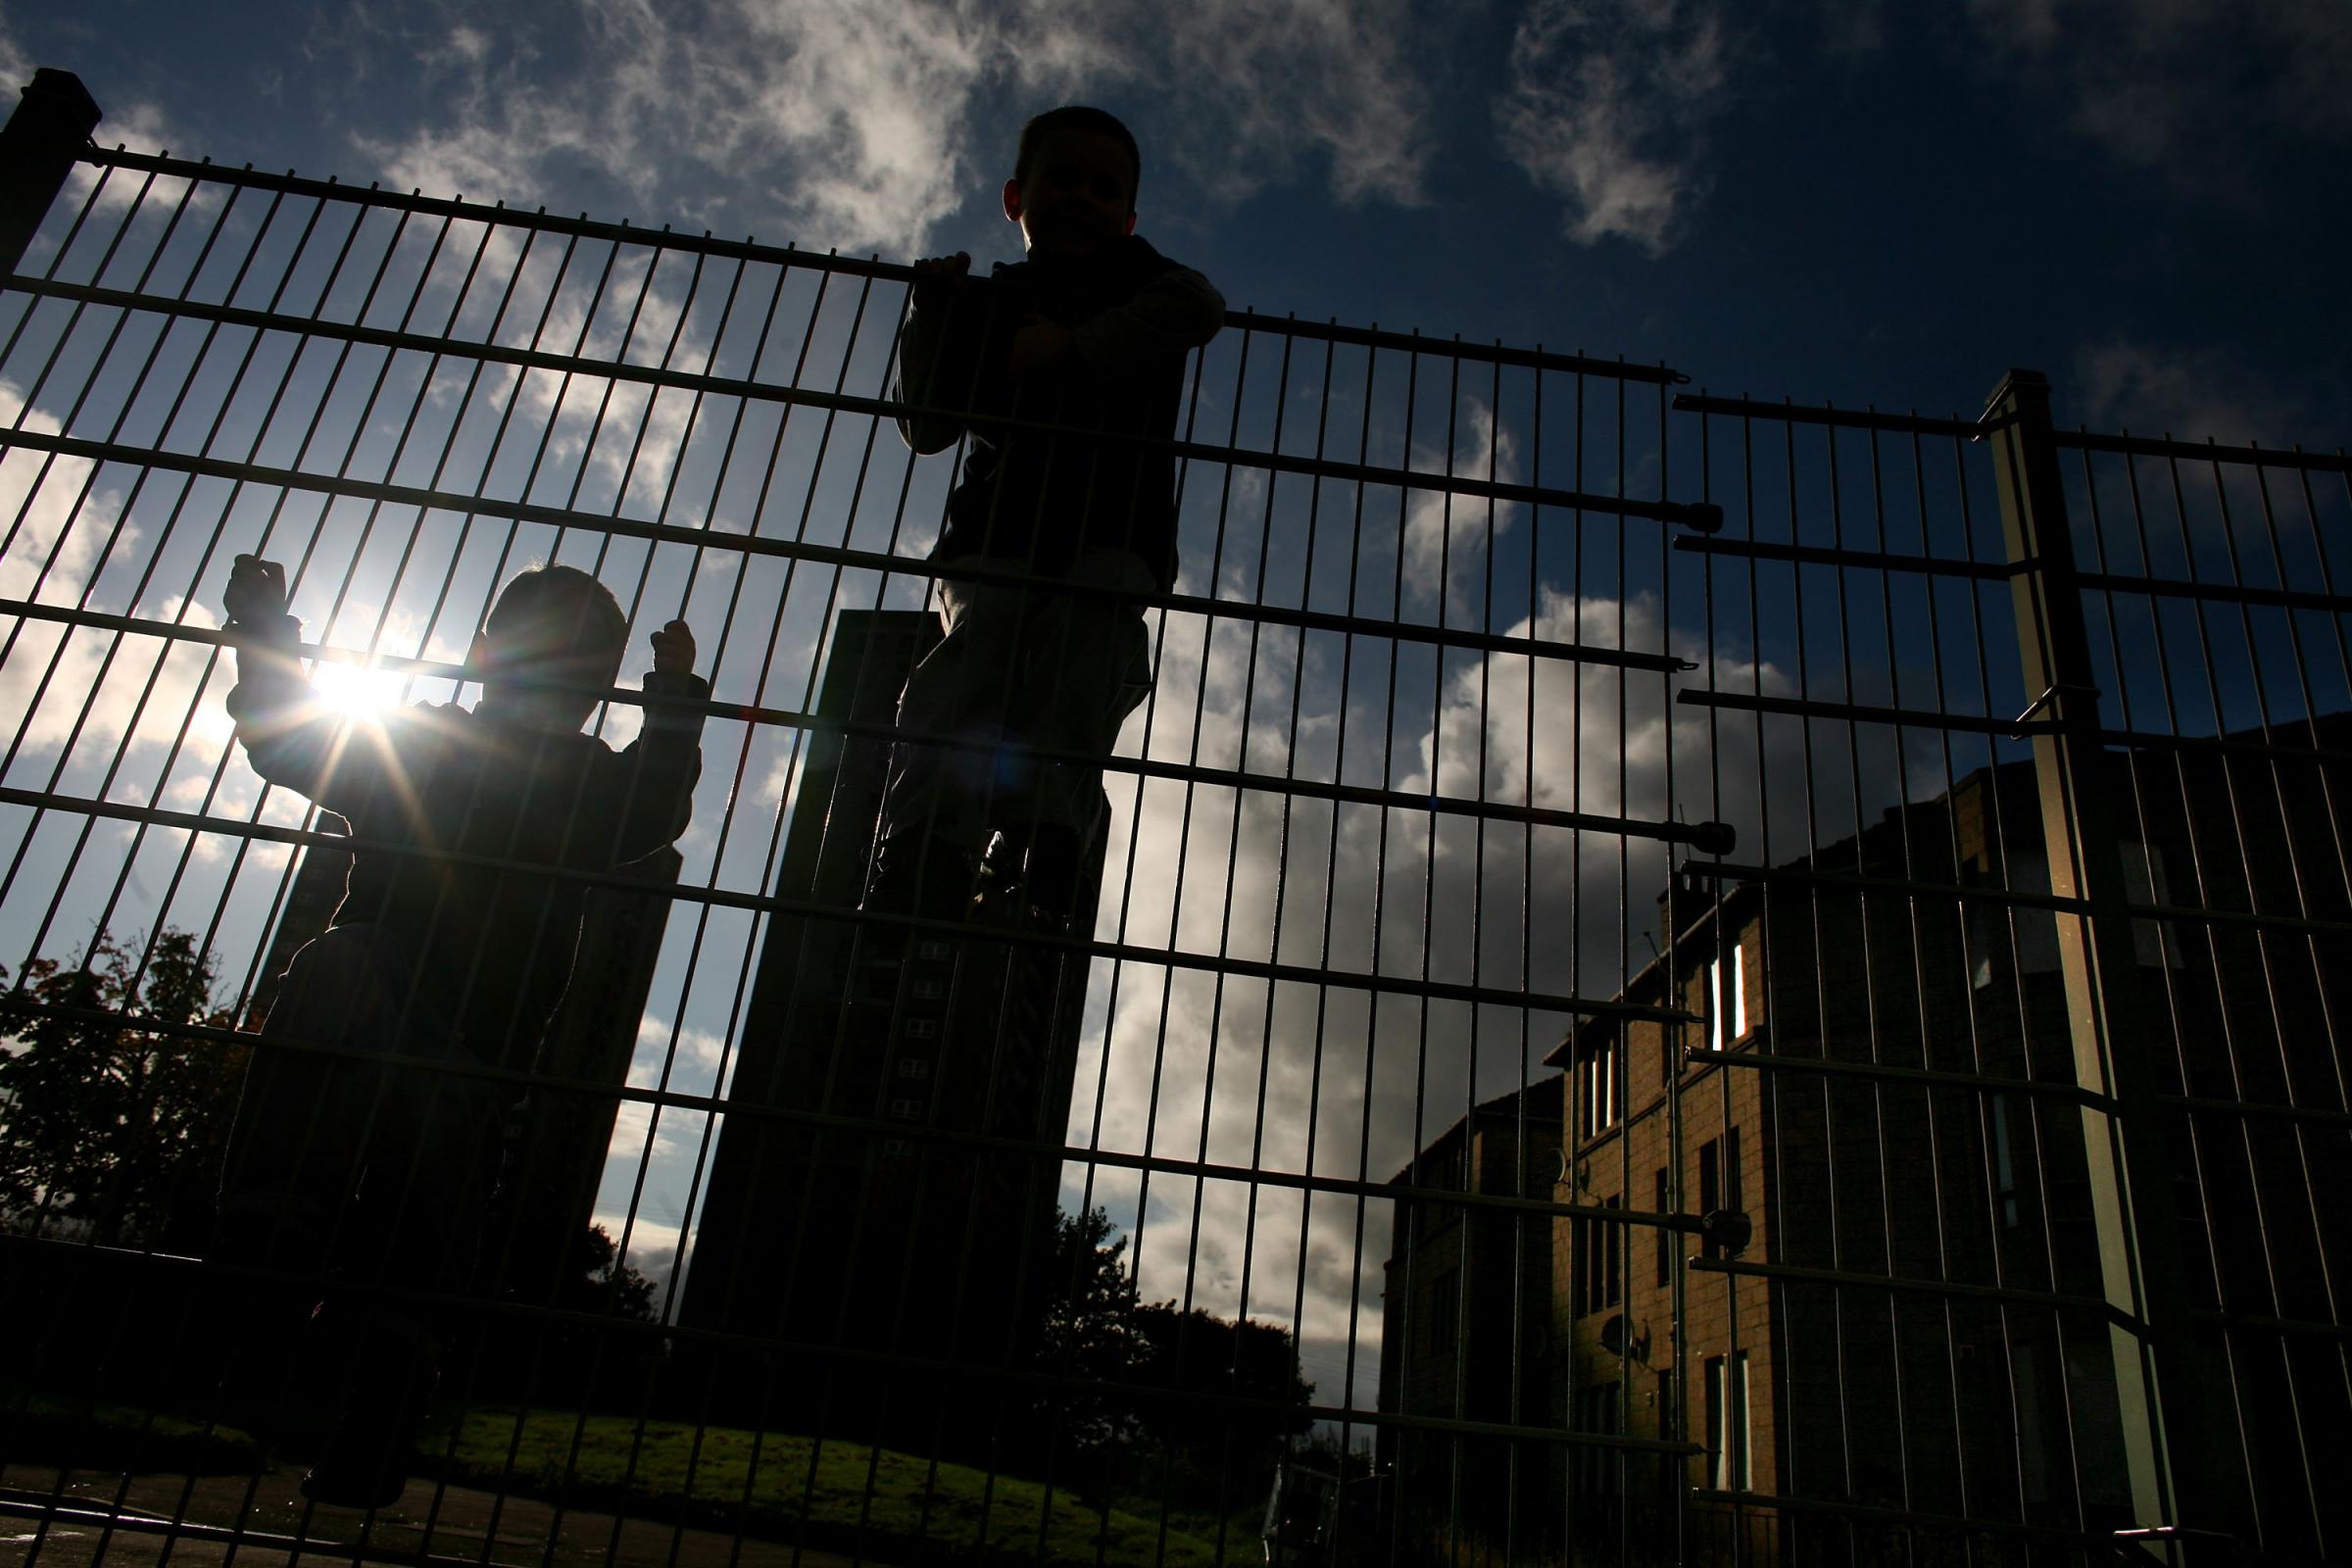 GLASGOW, UNITED KINGDOM - SEPTEMBER 30: (Editor’s note – since these images were taken the street pictured has been demolished) Two young boys climb on a fence in a street in the Govan neighborhood on September 30, 2008 in Glasgow, Scotland.